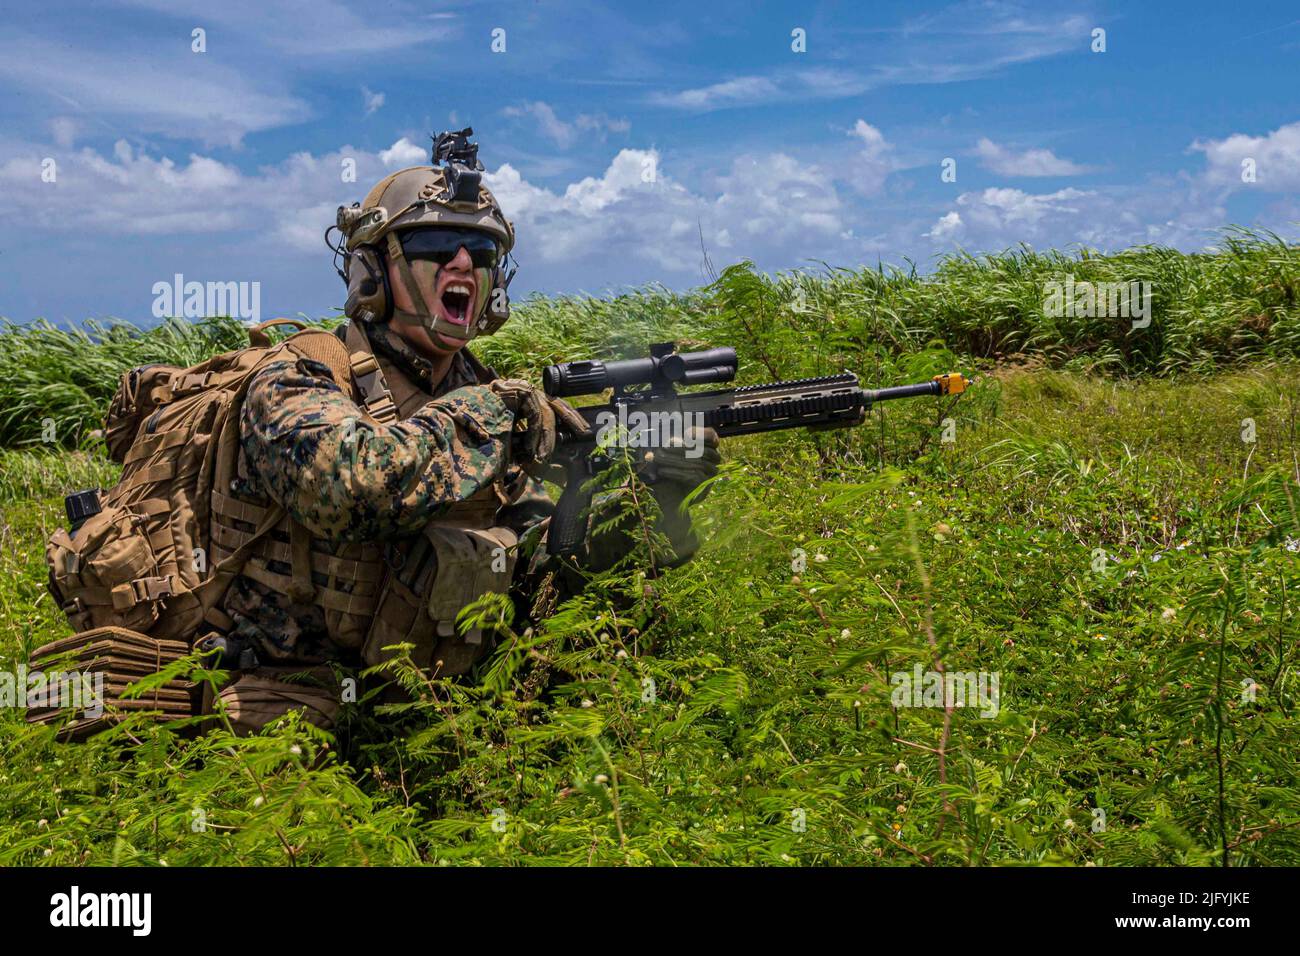 Camp Hansen, Okinawa, Japan. 28th June, 2022. U.S. Marine Corps Lance Cpl. Dali Miranda, an infantry Marine with Battalion Landing Team 2/5, 31st Marine Expeditionary Unit, posts security during a helicopter raid training exercise on Ie Shima, Okinawa, Japan, June 28, 2022. The training exercise consisted of Marines taking control of a known location to establish a Forward Arming and Refueling Point. The 31st MEU, the Marine Corps' only continuously forward-deployed MEU, provides a flexible and lethal force ready to perform a wide range of military operations as the premiere crisis response Stock Photo